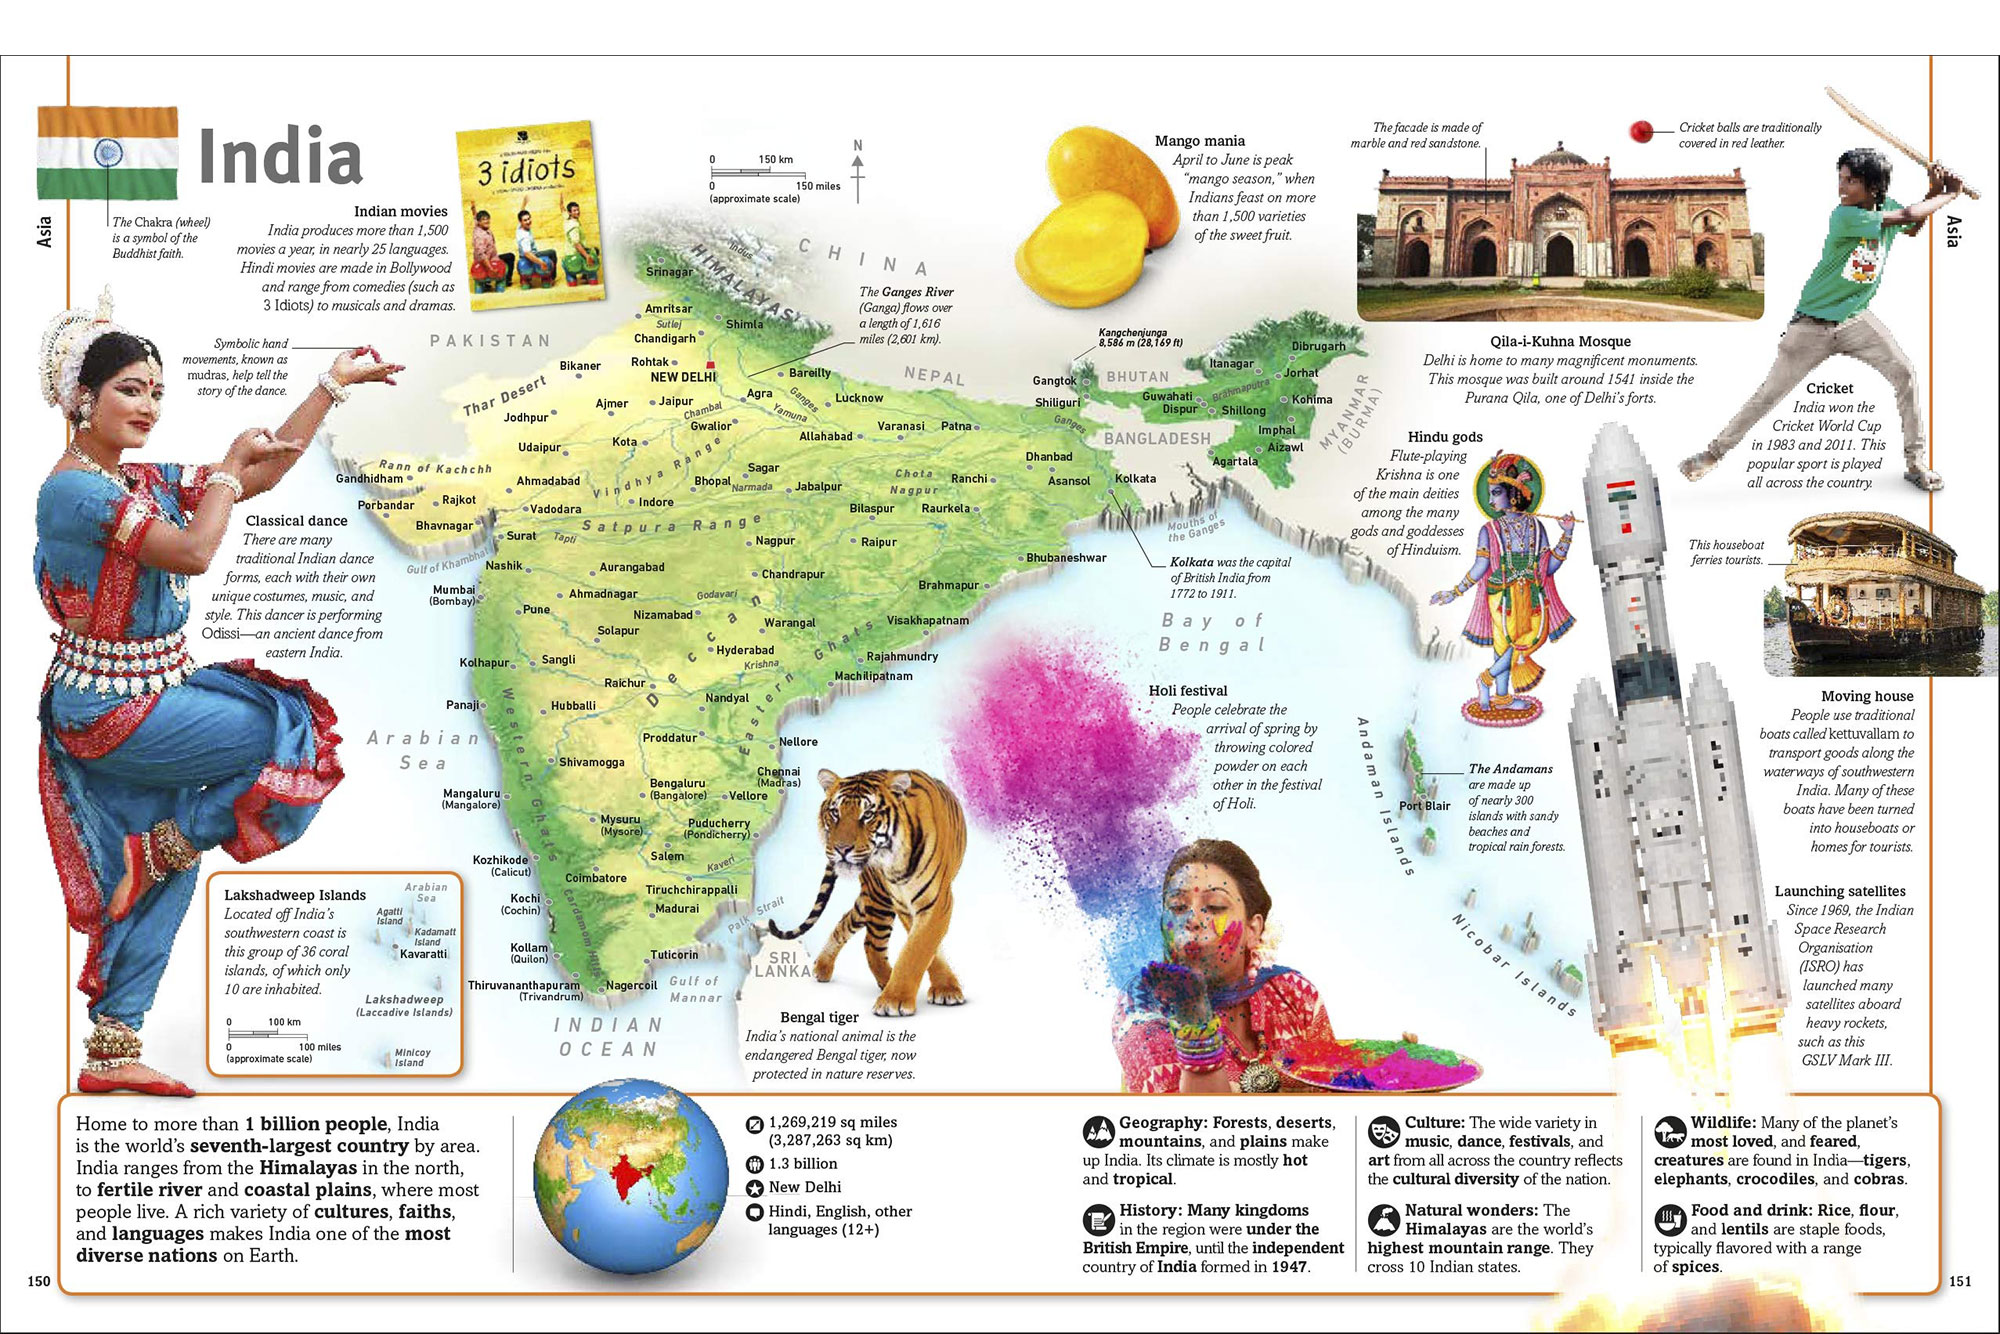 Pictorial map, photos, and graphics of India